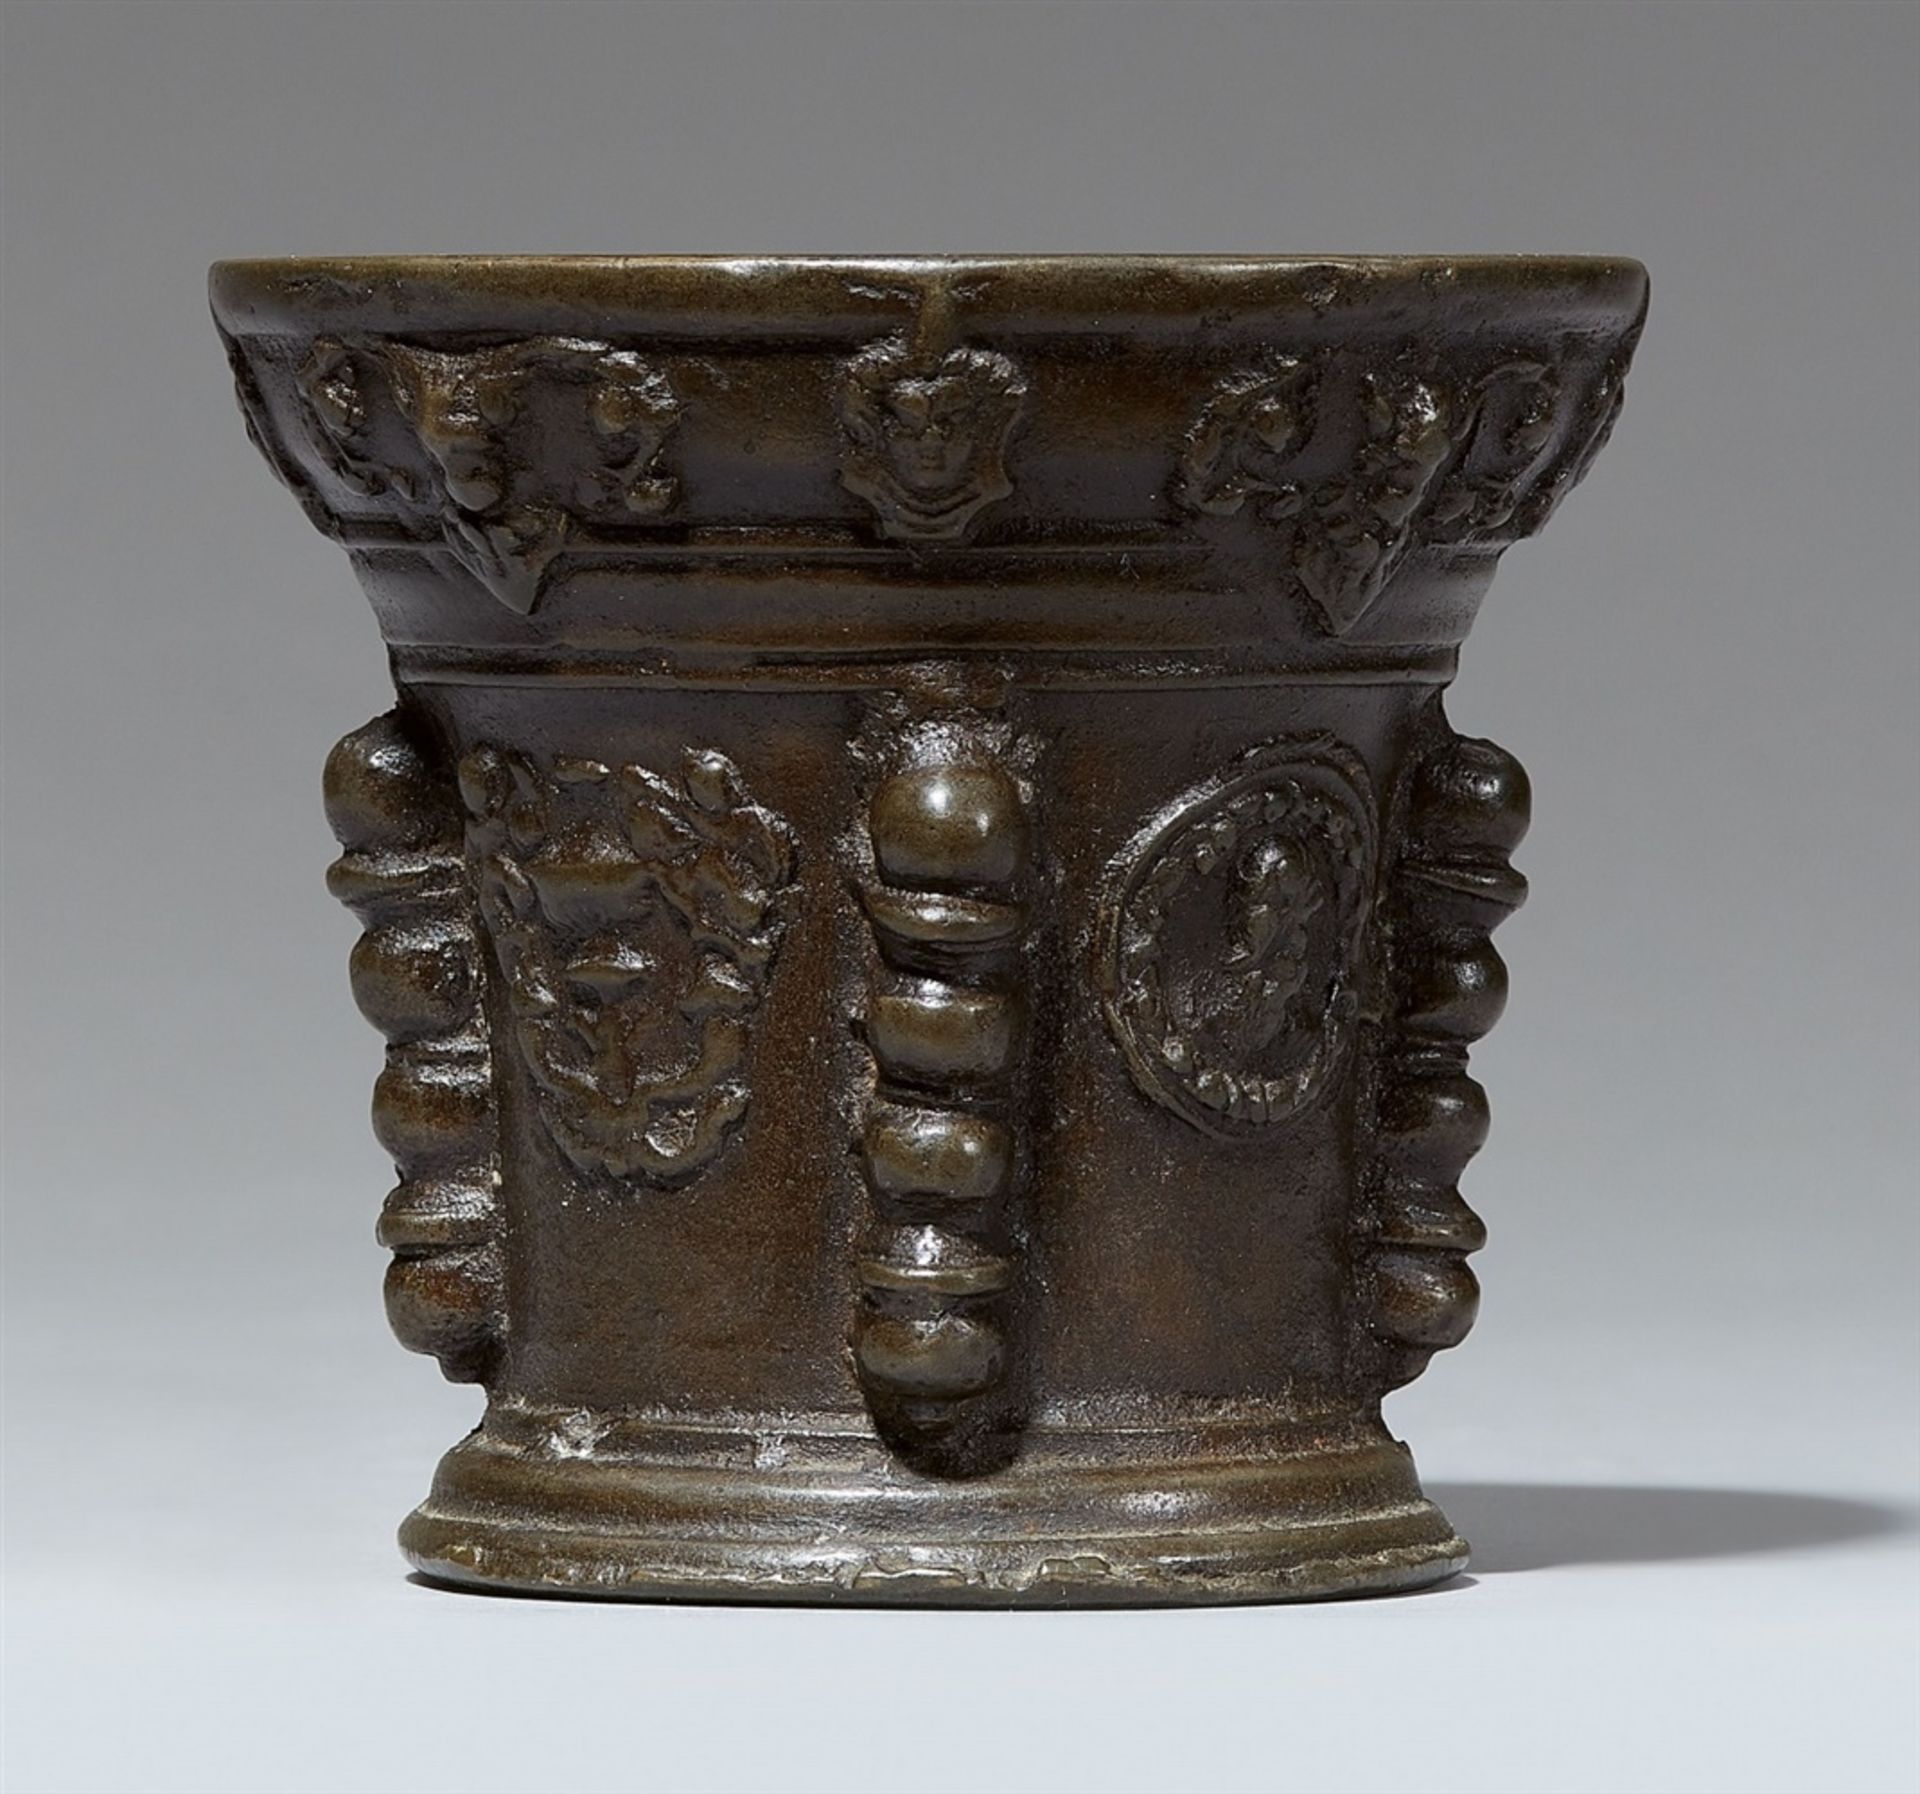 A French ribbed mortar with grotesquesCast bronze with dark brown patina (slightly porous). Of